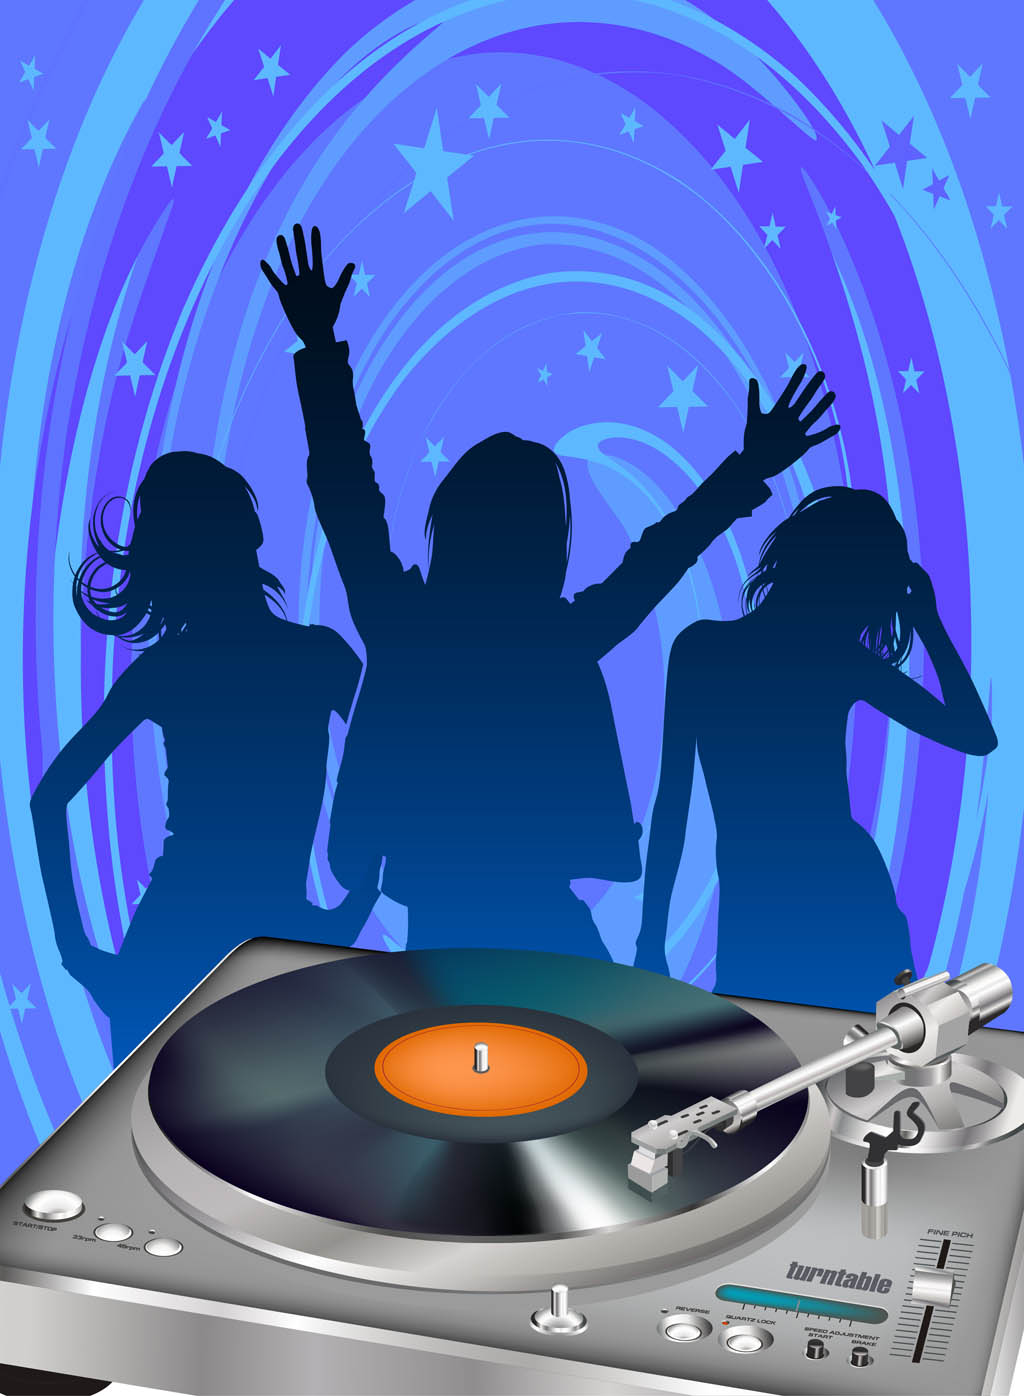 Disco Party Poster Template Vector Art & Graphics | freevector.com